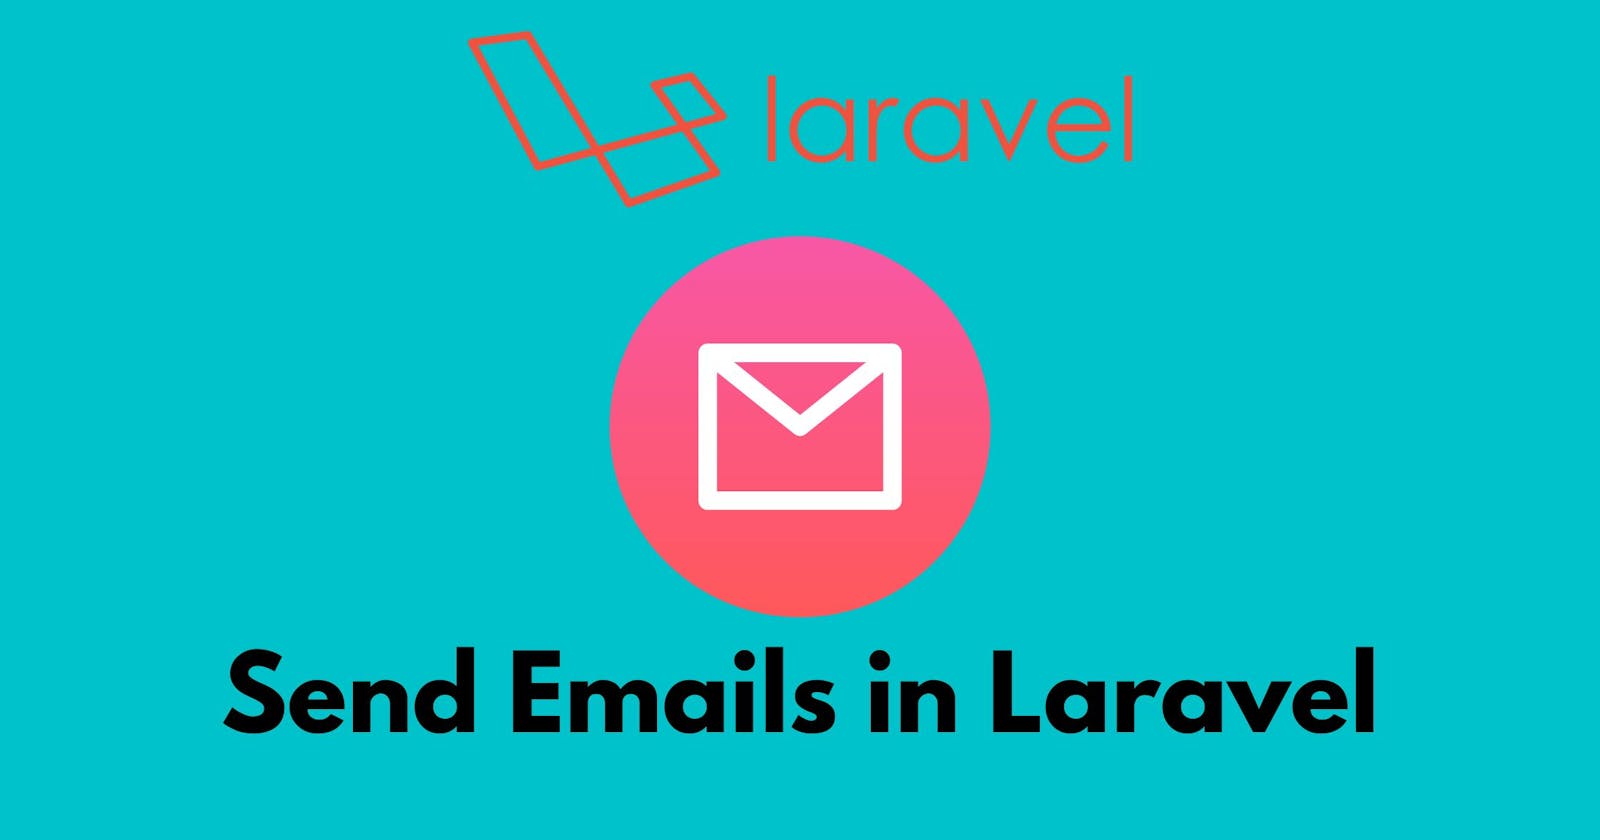 Laravel Mail: How to Send Emails Easily in Laravel